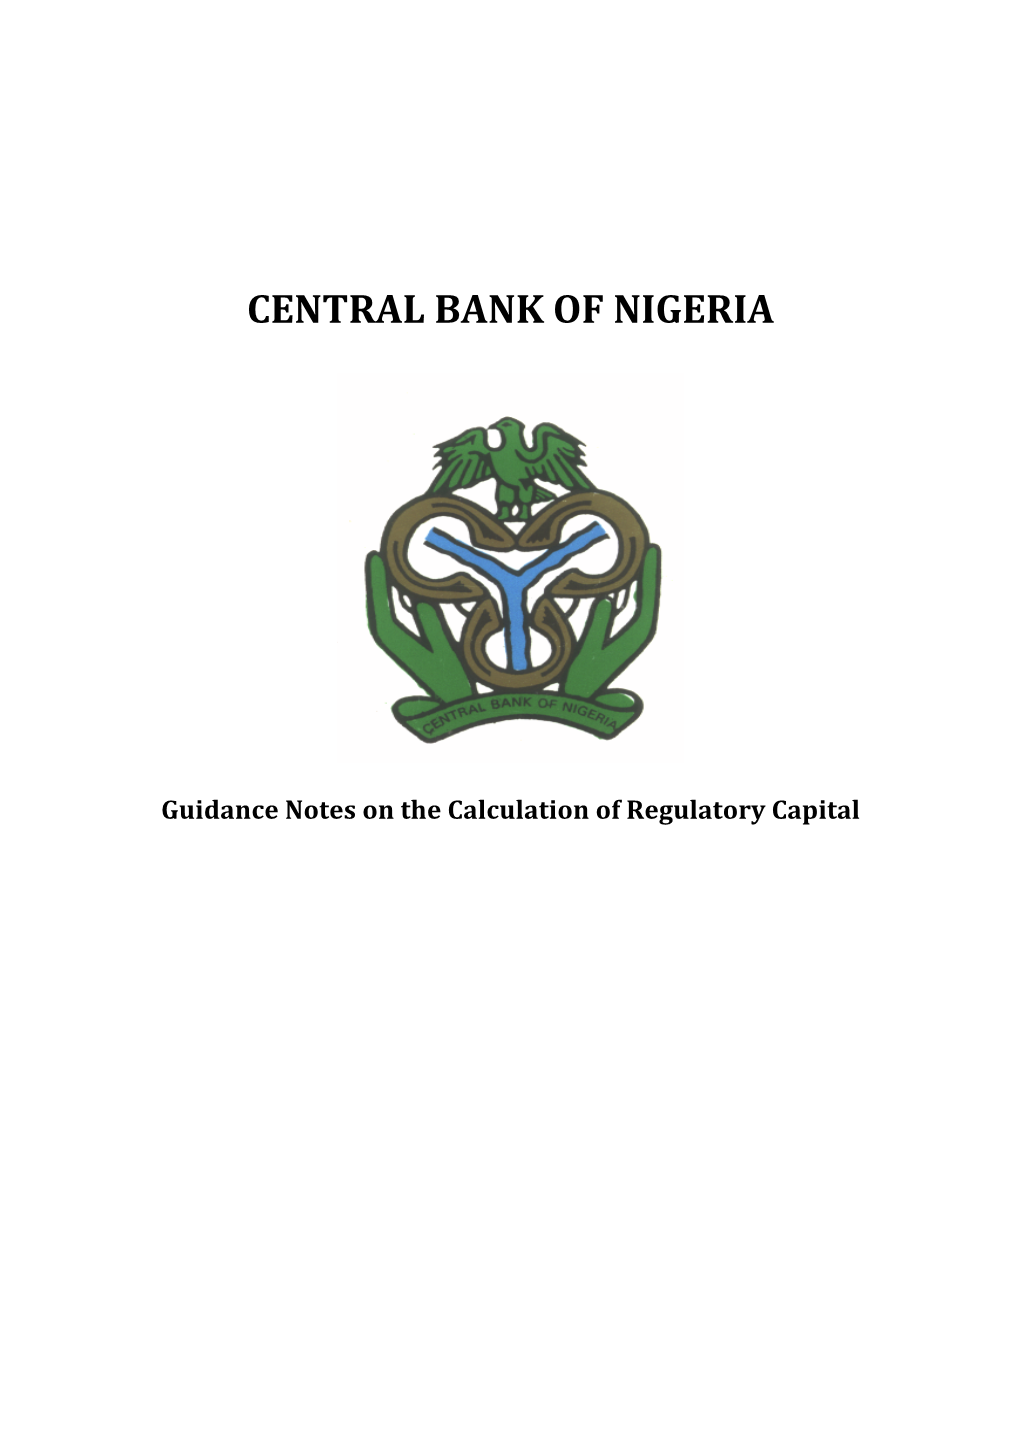 Guidance Notes on the Calculation of Regulatory Capital